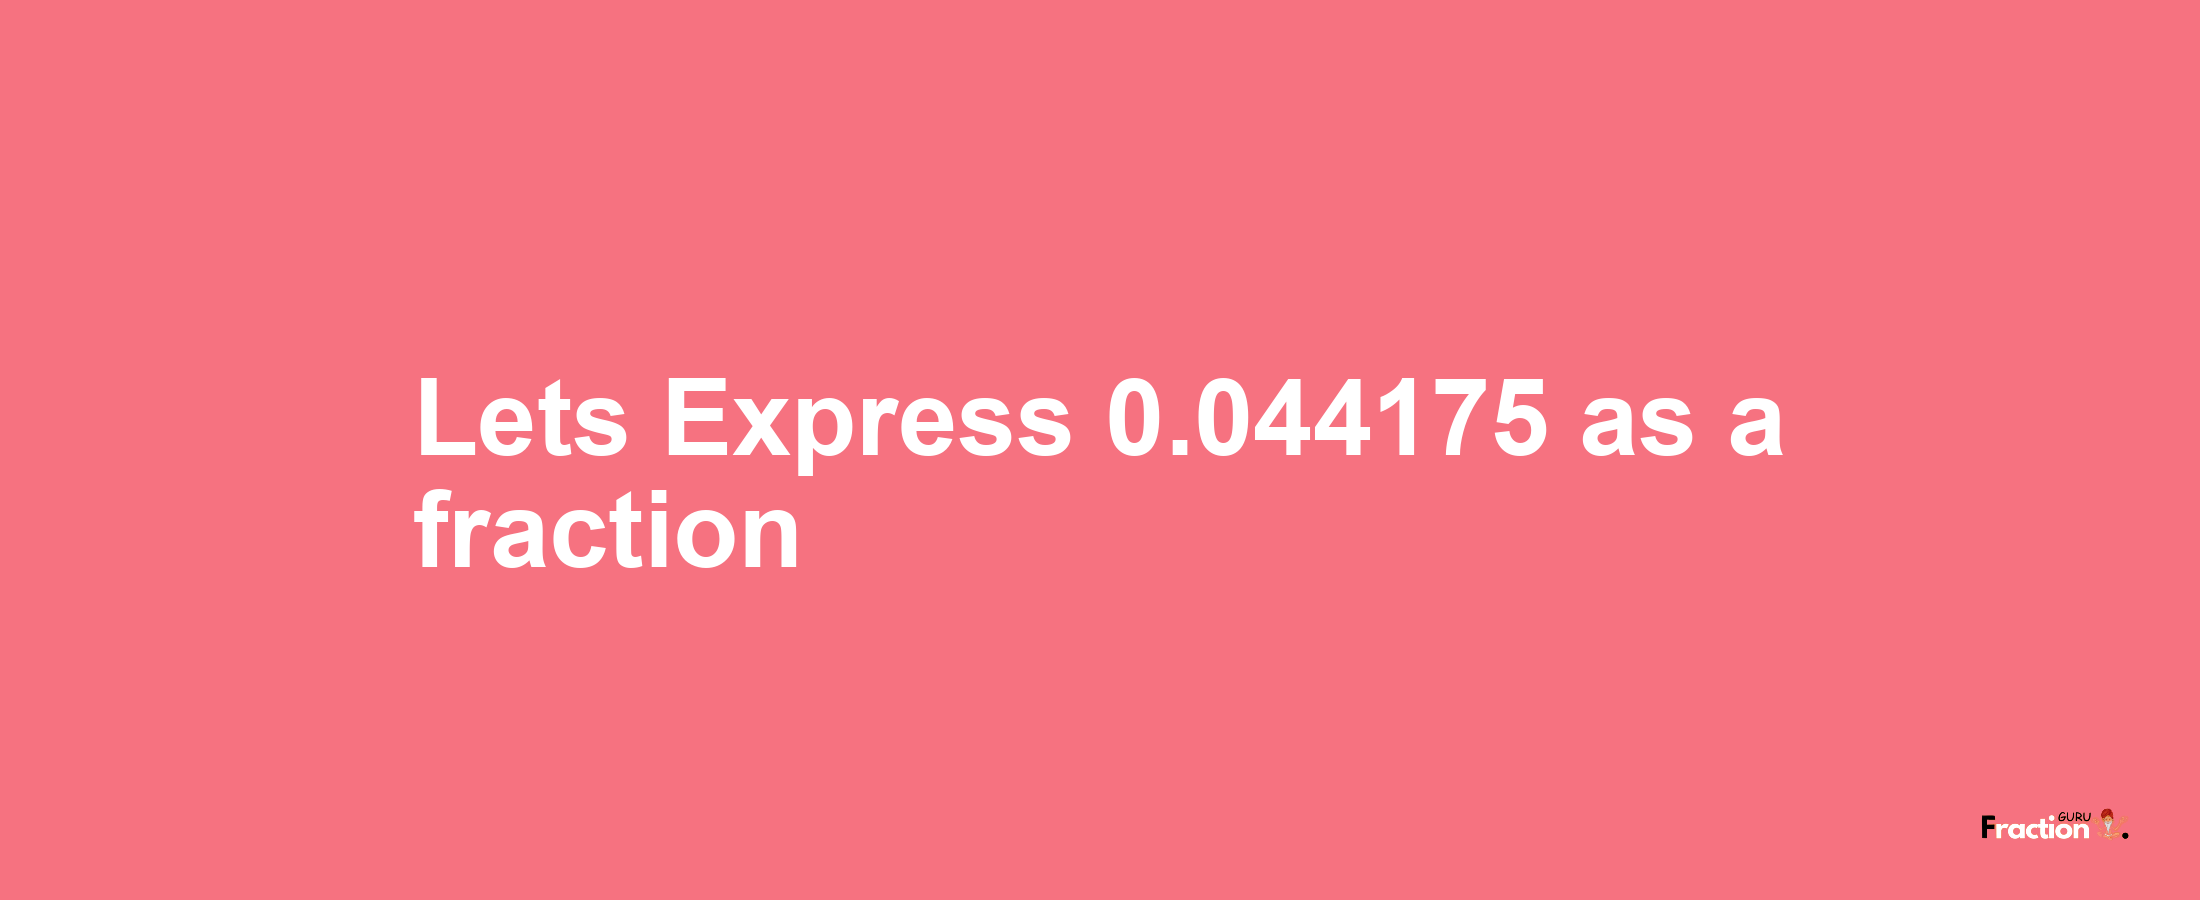 Lets Express 0.044175 as afraction